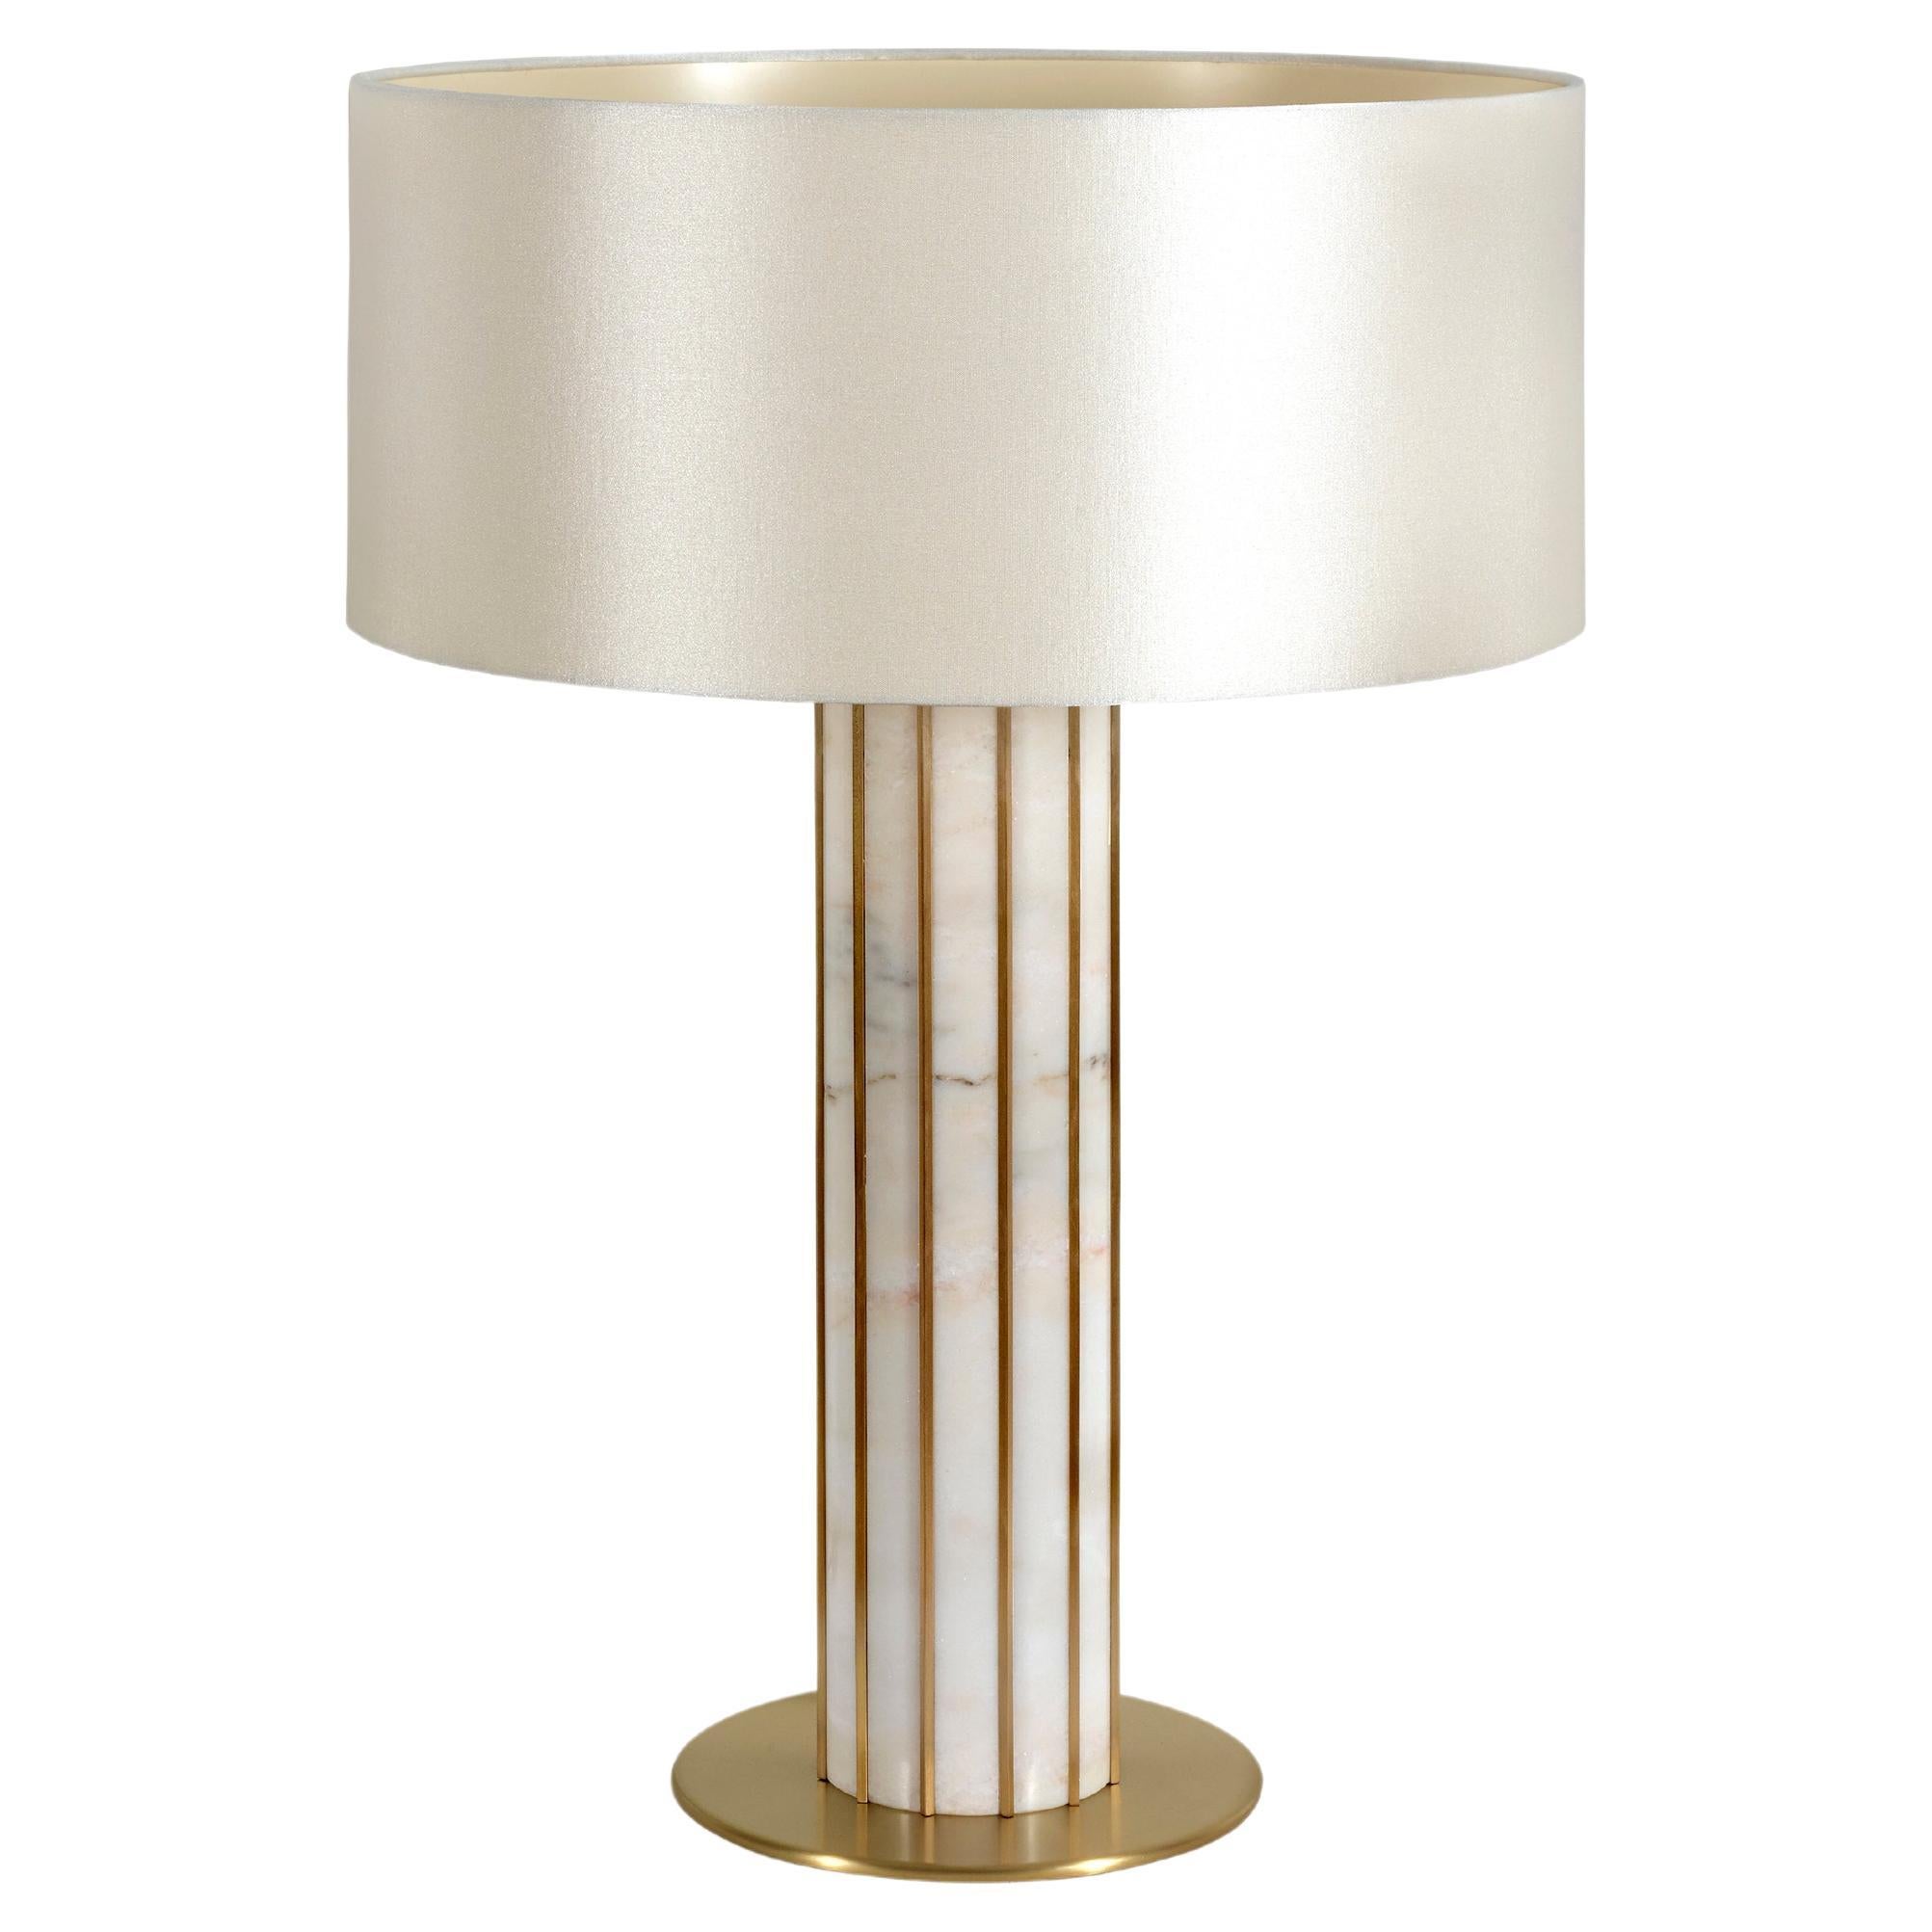 Seagram Estremoz Marble Table Lamp by InsidherLand For Sale